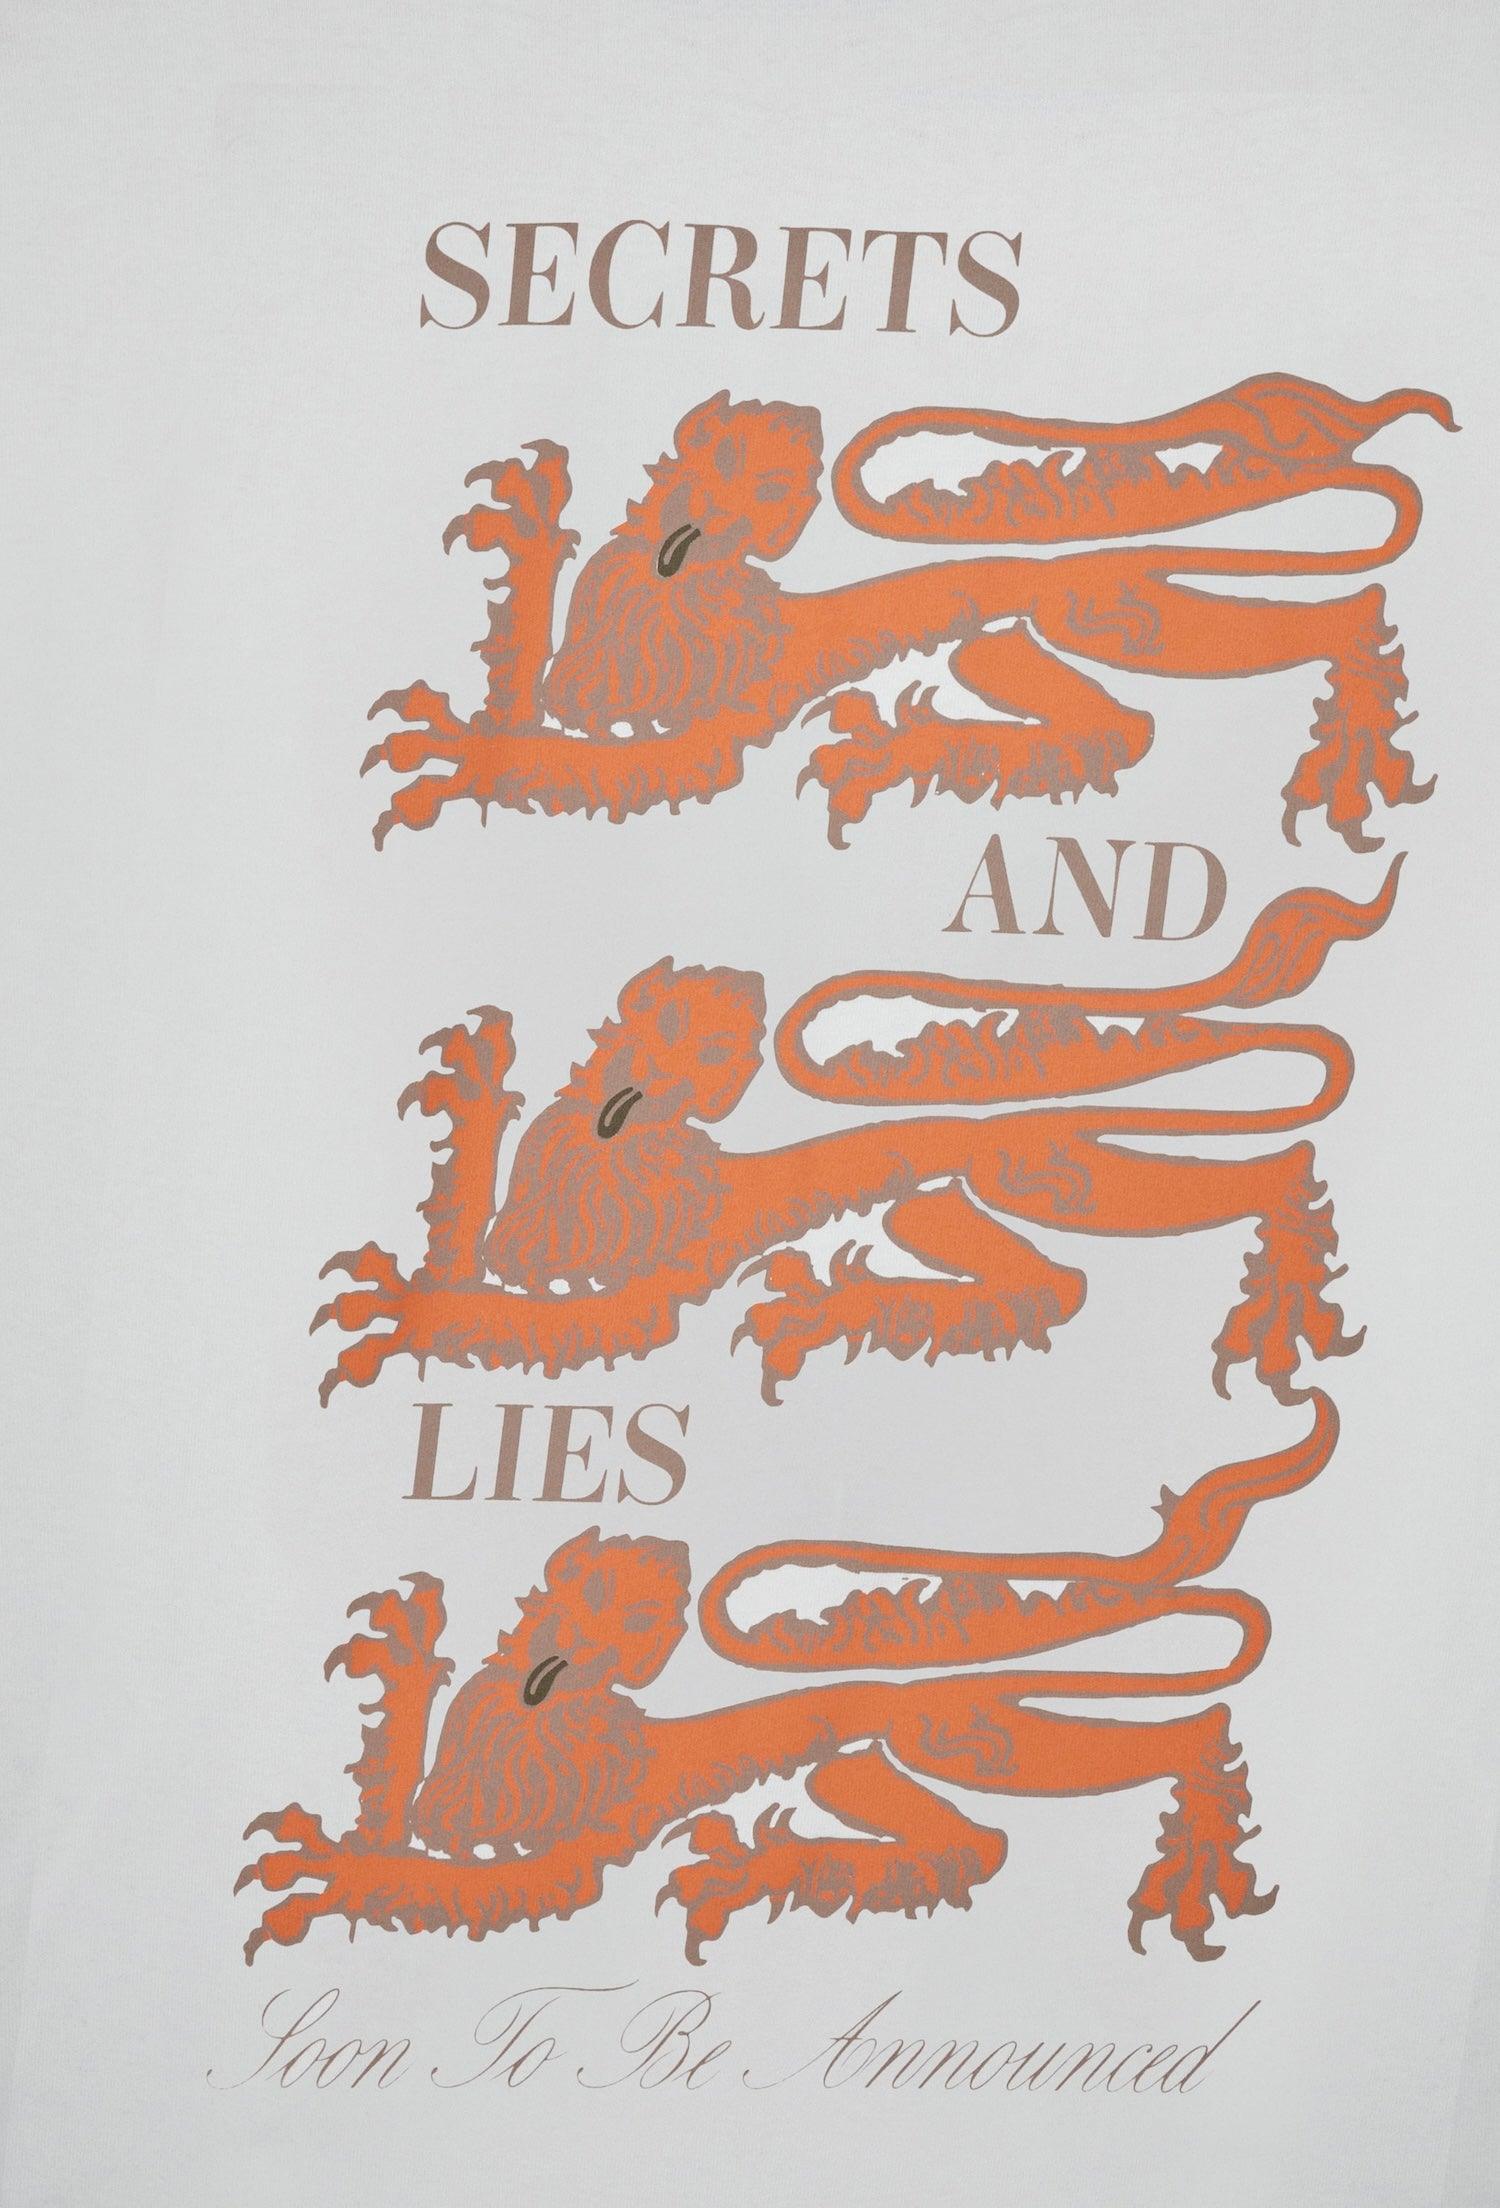 Three Lions L/S T-Shirt - SOON TO BE ANNOUNCED